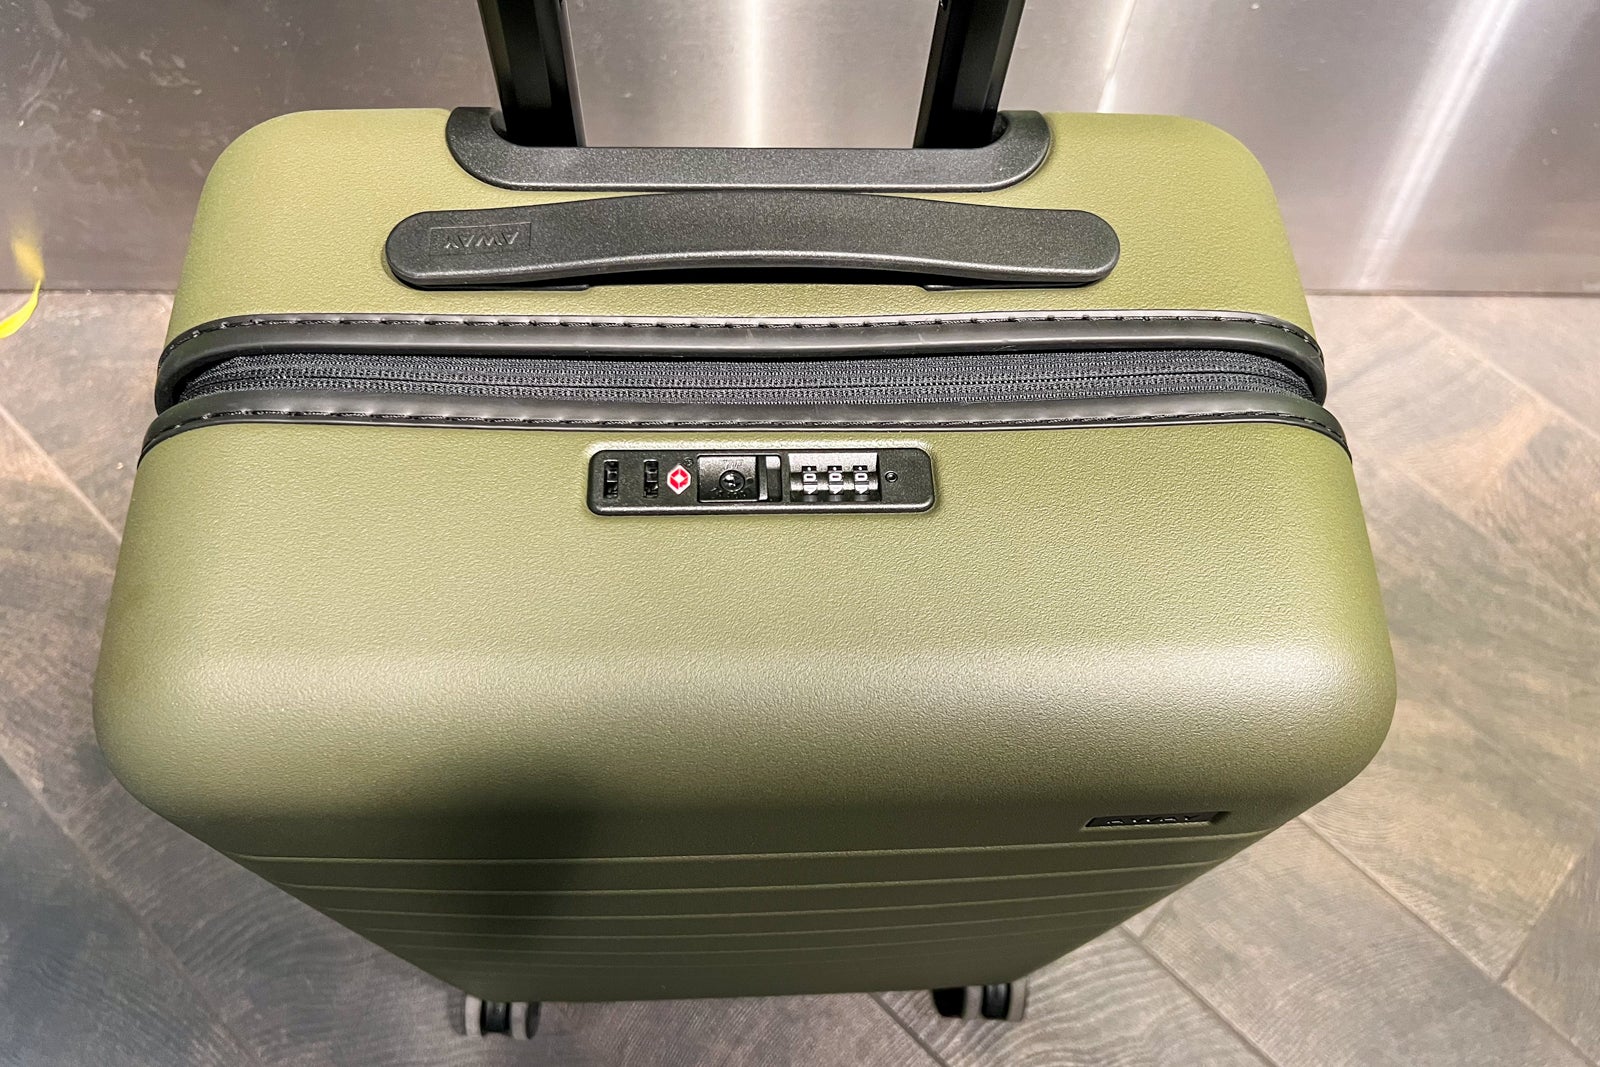 The Carry-On suitcase  Away: Built for modern travel